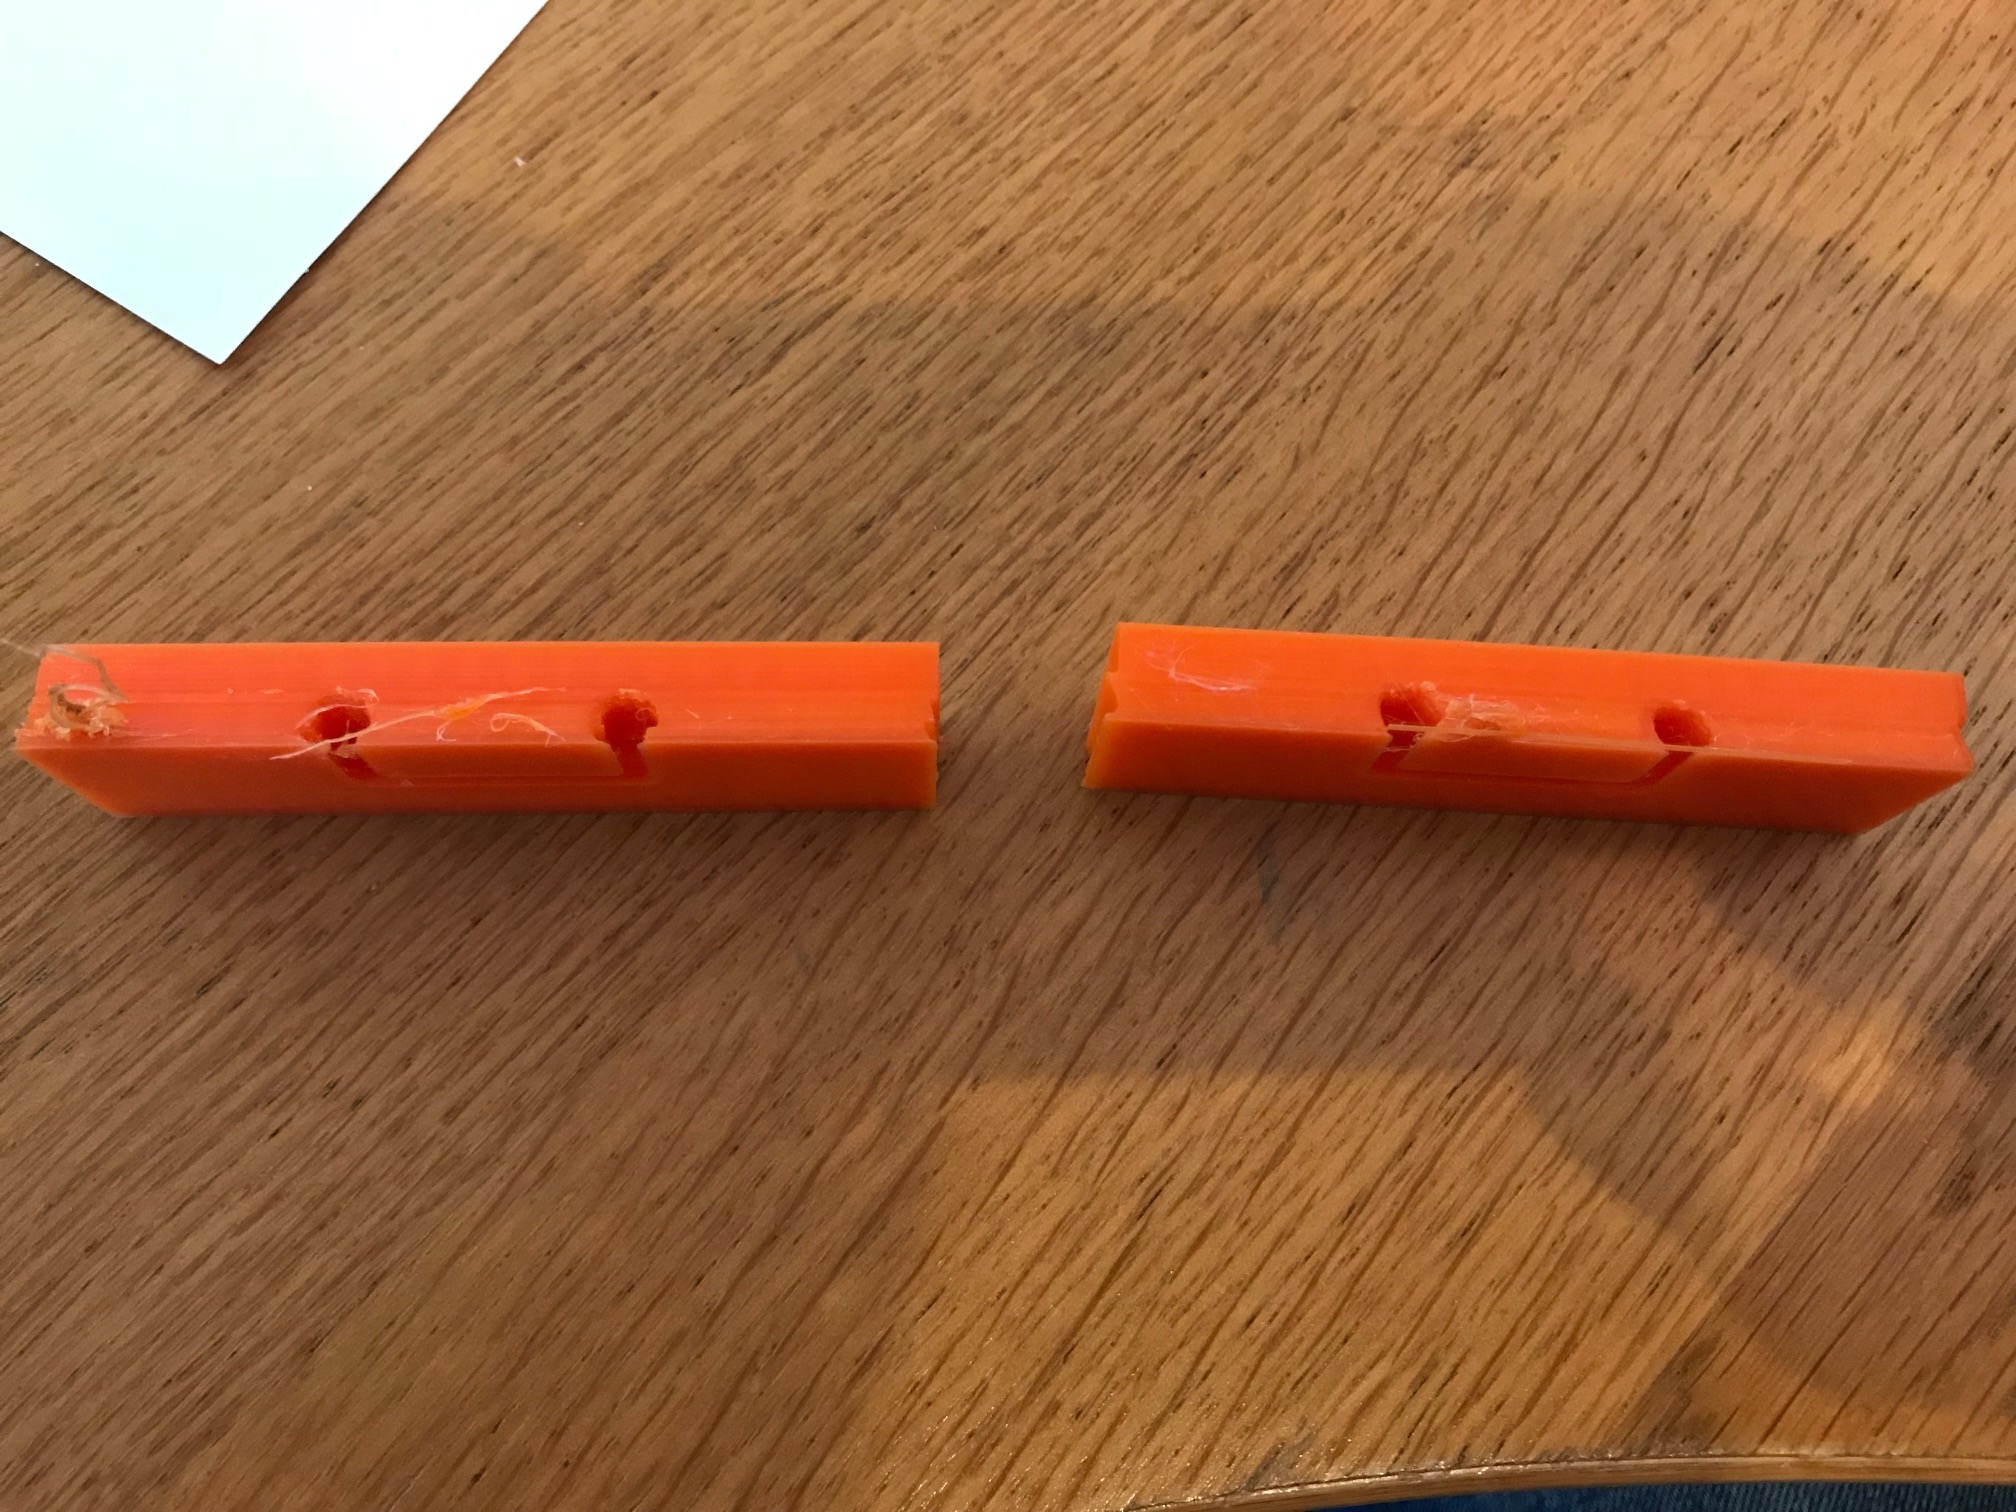 Printing with PETG – How do I print this? (Printing help